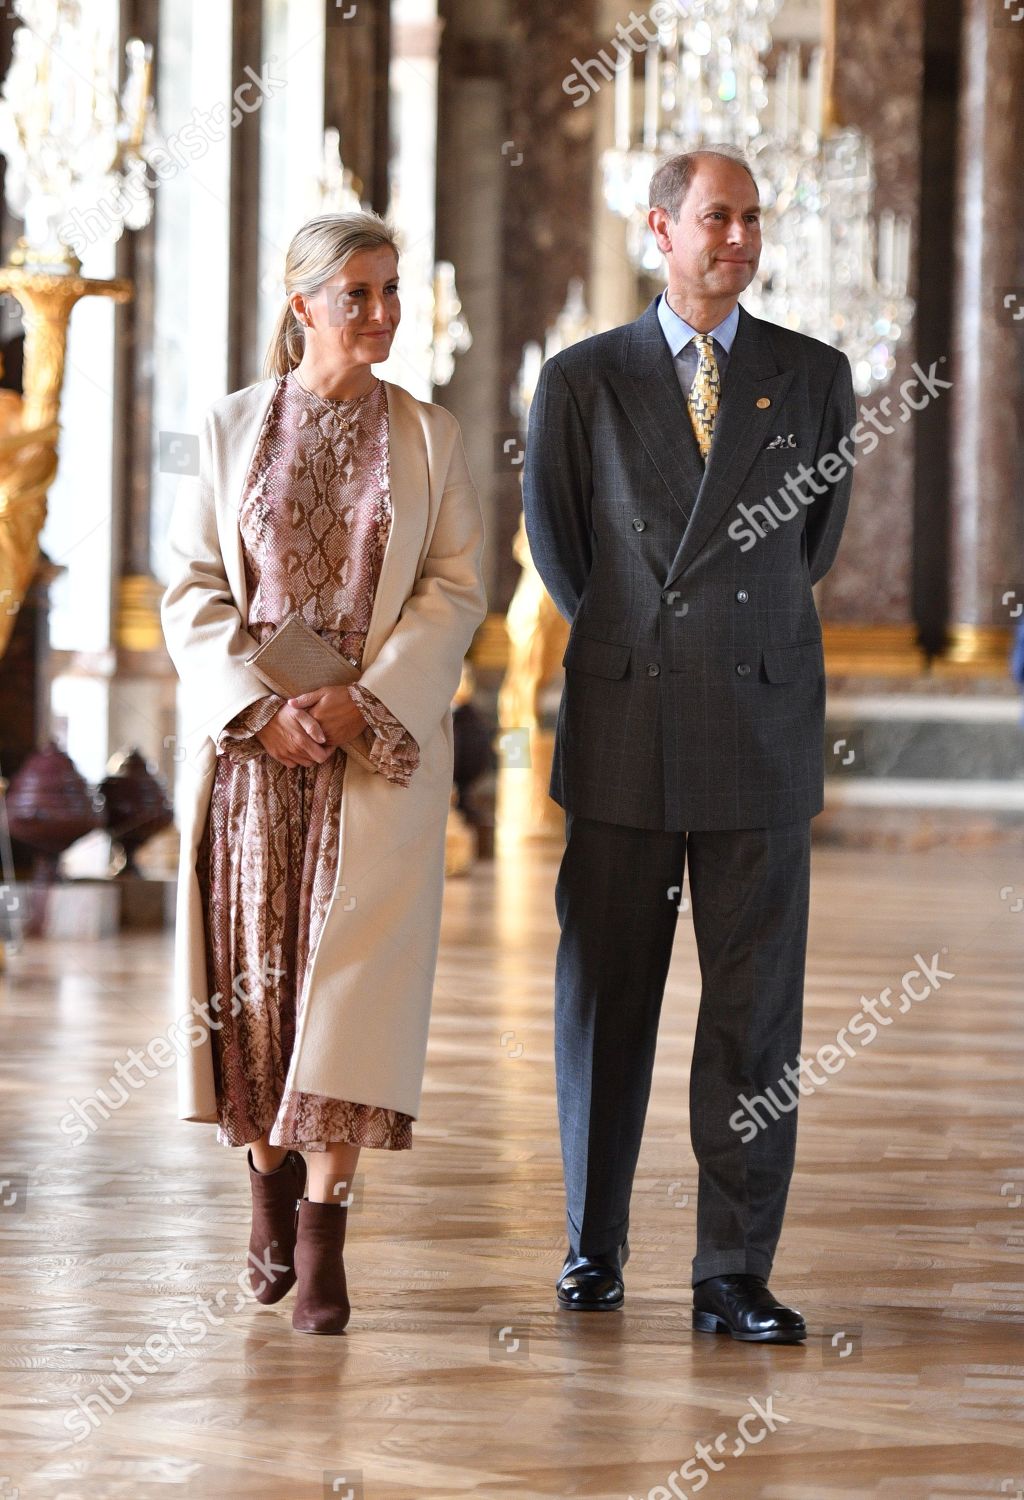 prince-edward-and-sophie-countess-of-wessex-visit-to-paris-france-shutterstock-editorial-9907868z.jpg